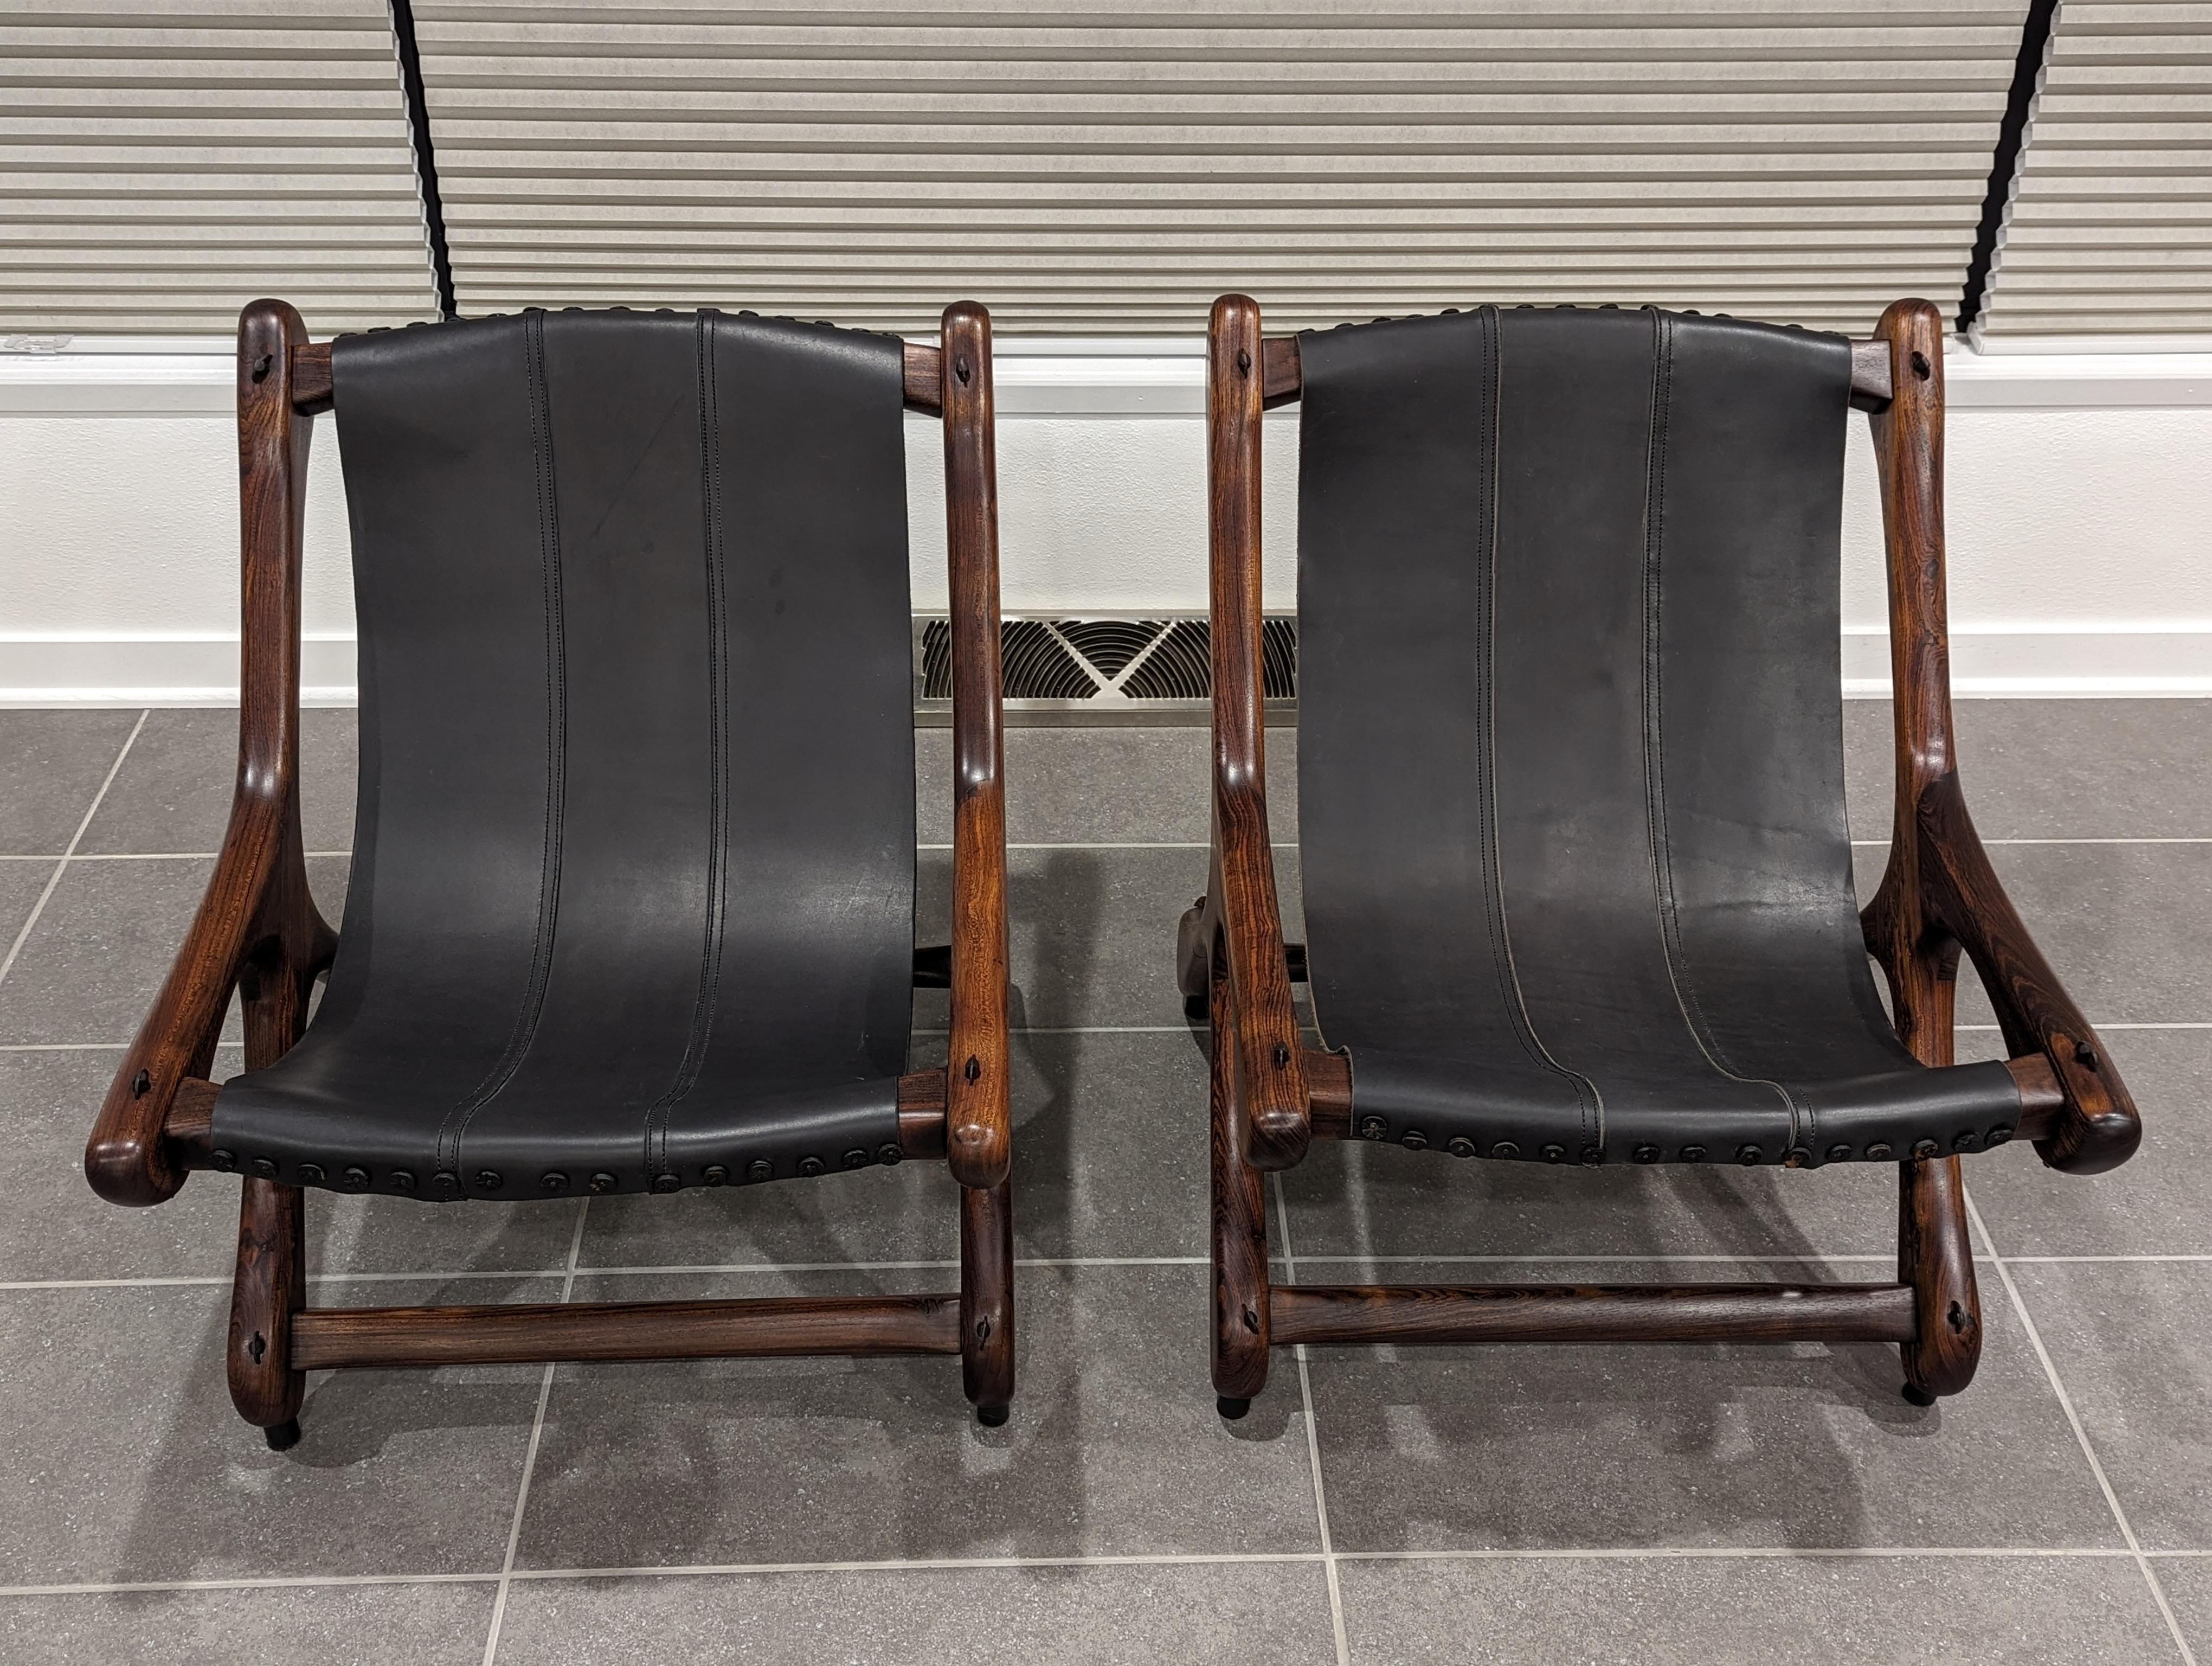 Don Shoemaker Sloucher Rosewood & Leather Sling Chairs for Señal, S.A., 1960s For Sale 11